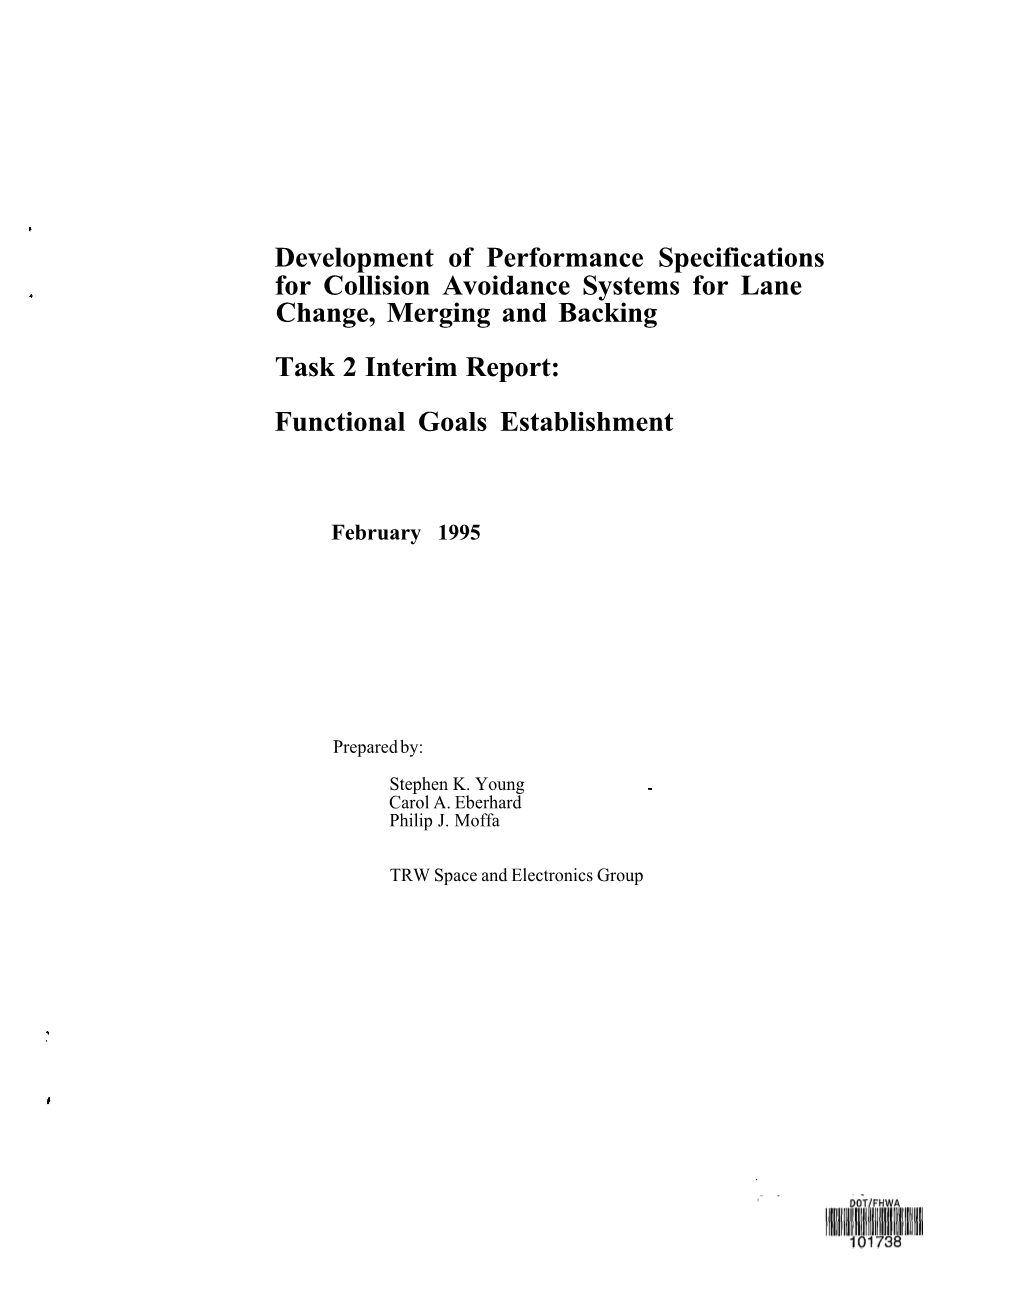 Development of Performance Specifications for Collision Avoidance Systems for Lane Change, Merging and Backing Task 2 Interim Report: Functional Goals Establishment